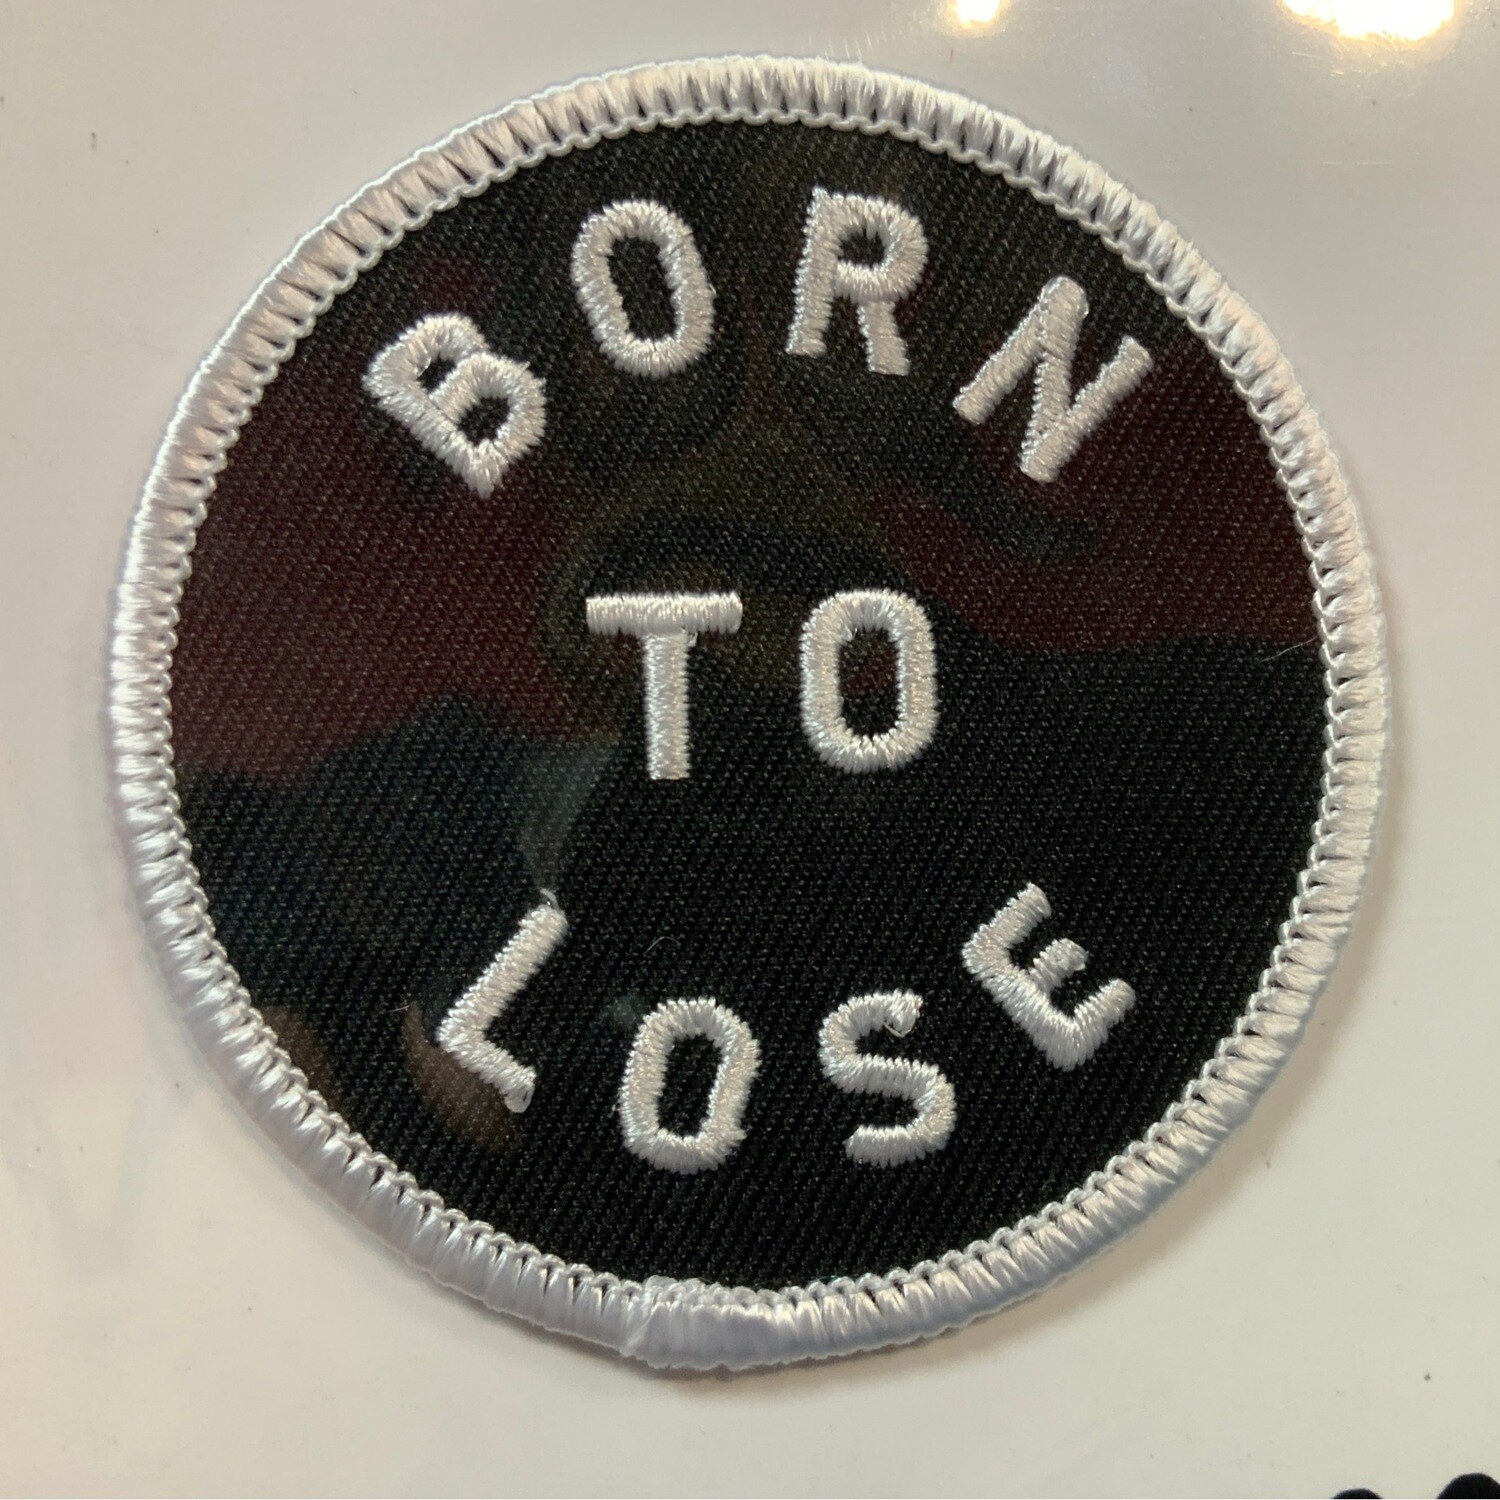 Born To Lose - Embroidered Patch from These Are Things